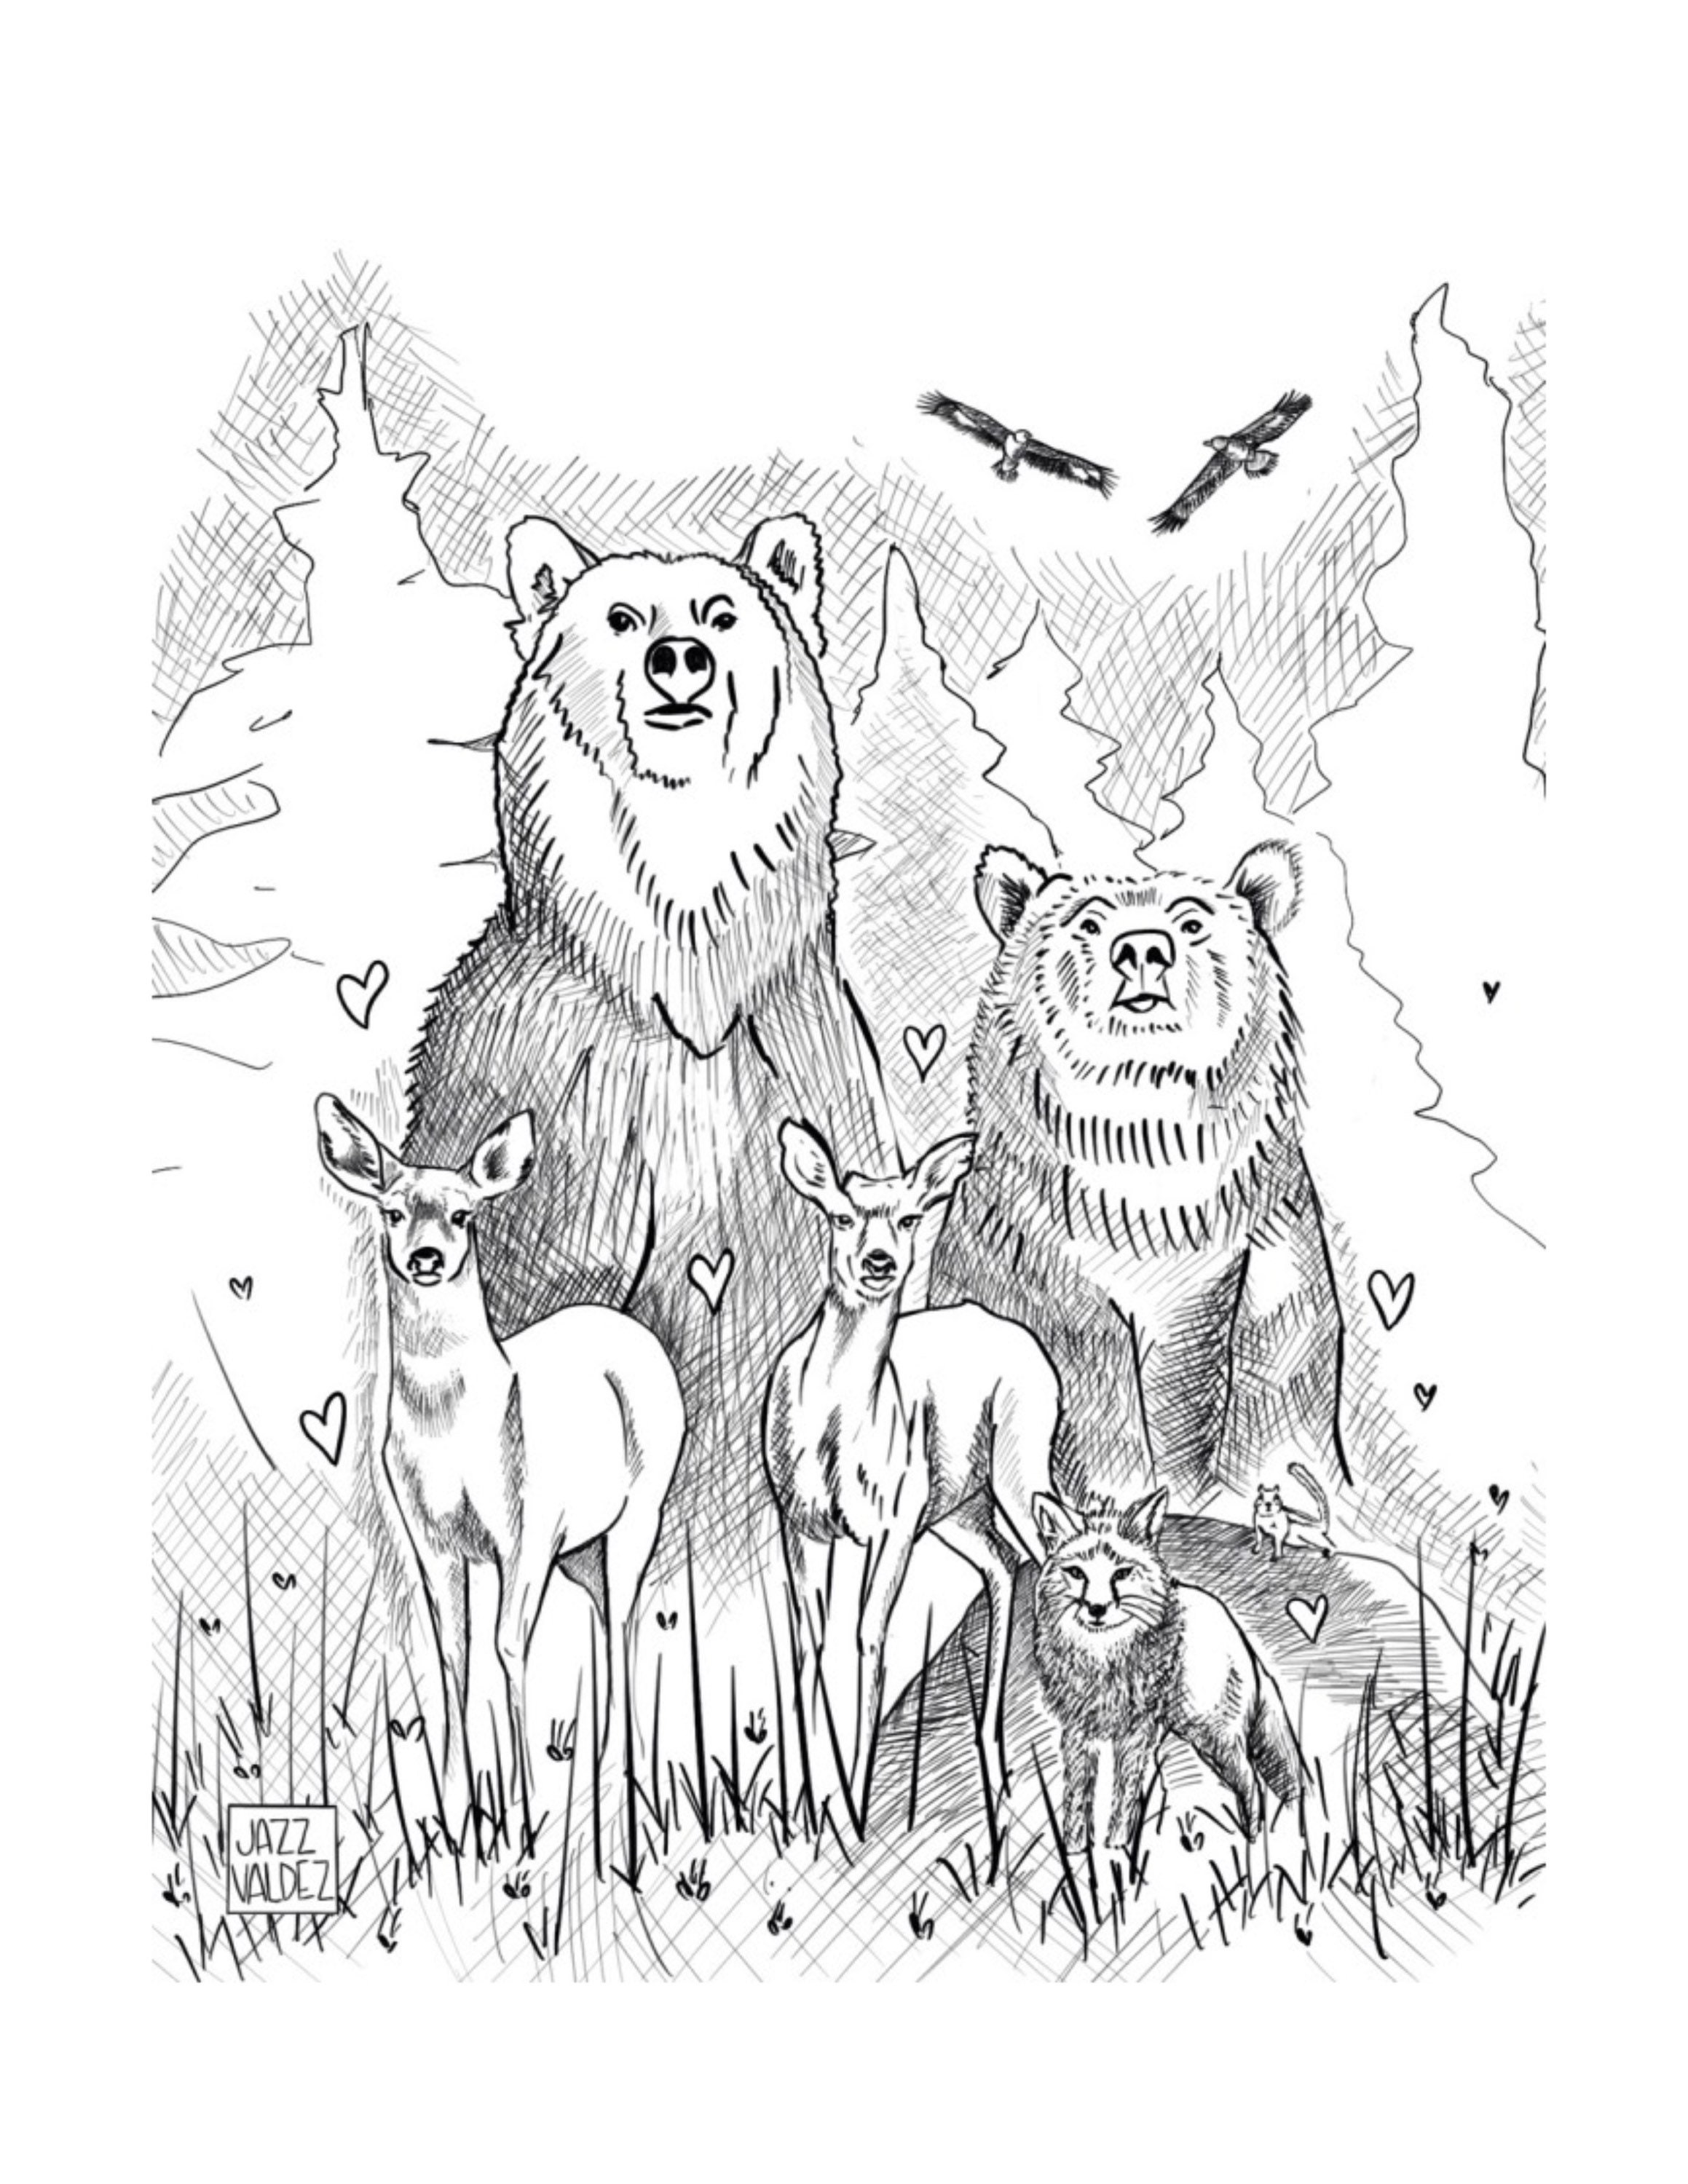 forest animals coloring pages